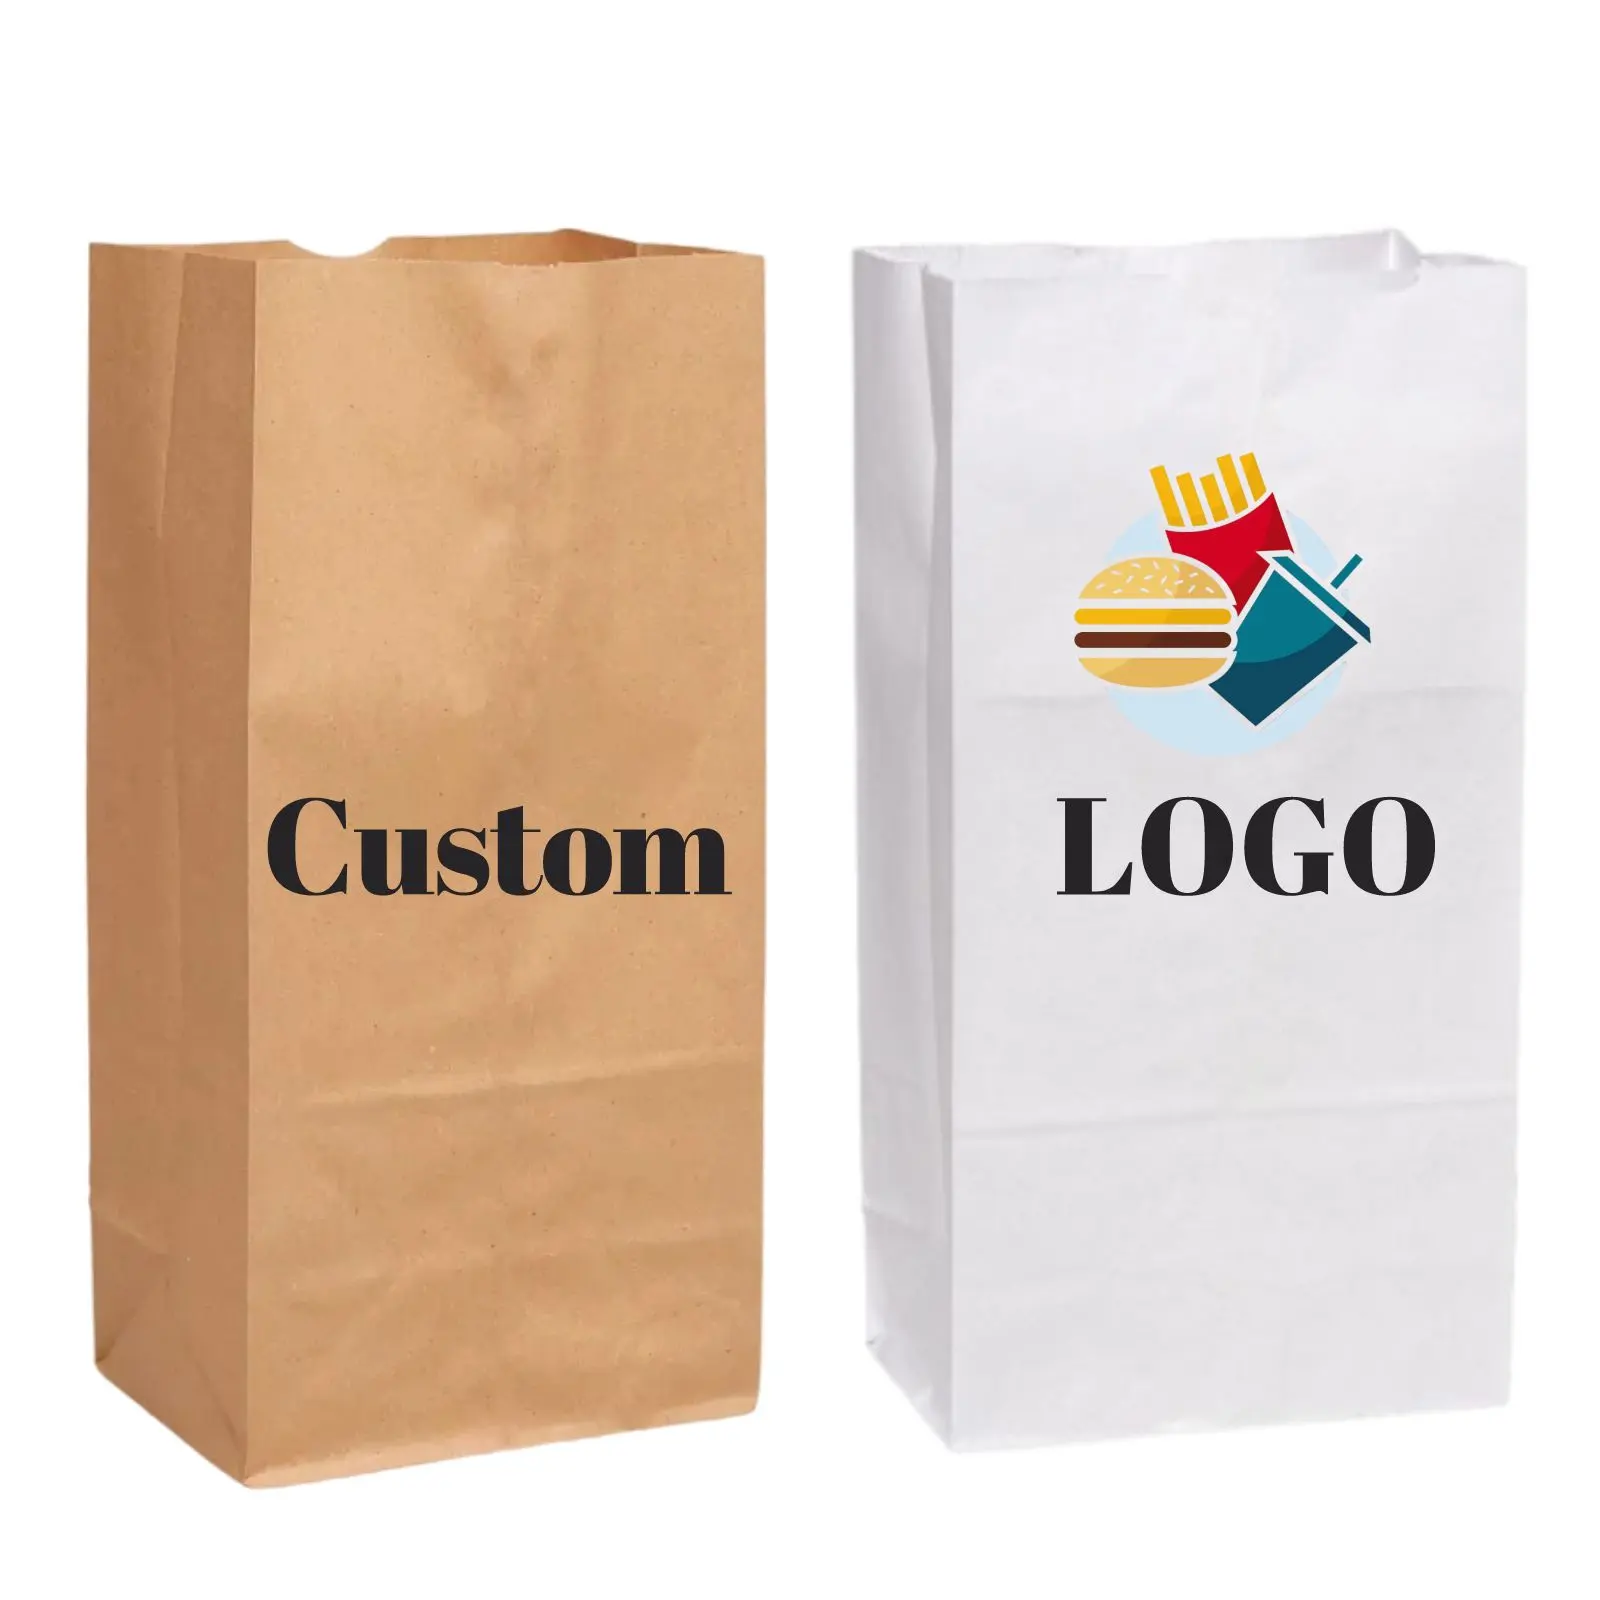 Custom Design Logo Grease proof Baking Barbecue Bread Snack Food Takeout Takeaway Packaging Square Bottom White Kraft Paper Bag